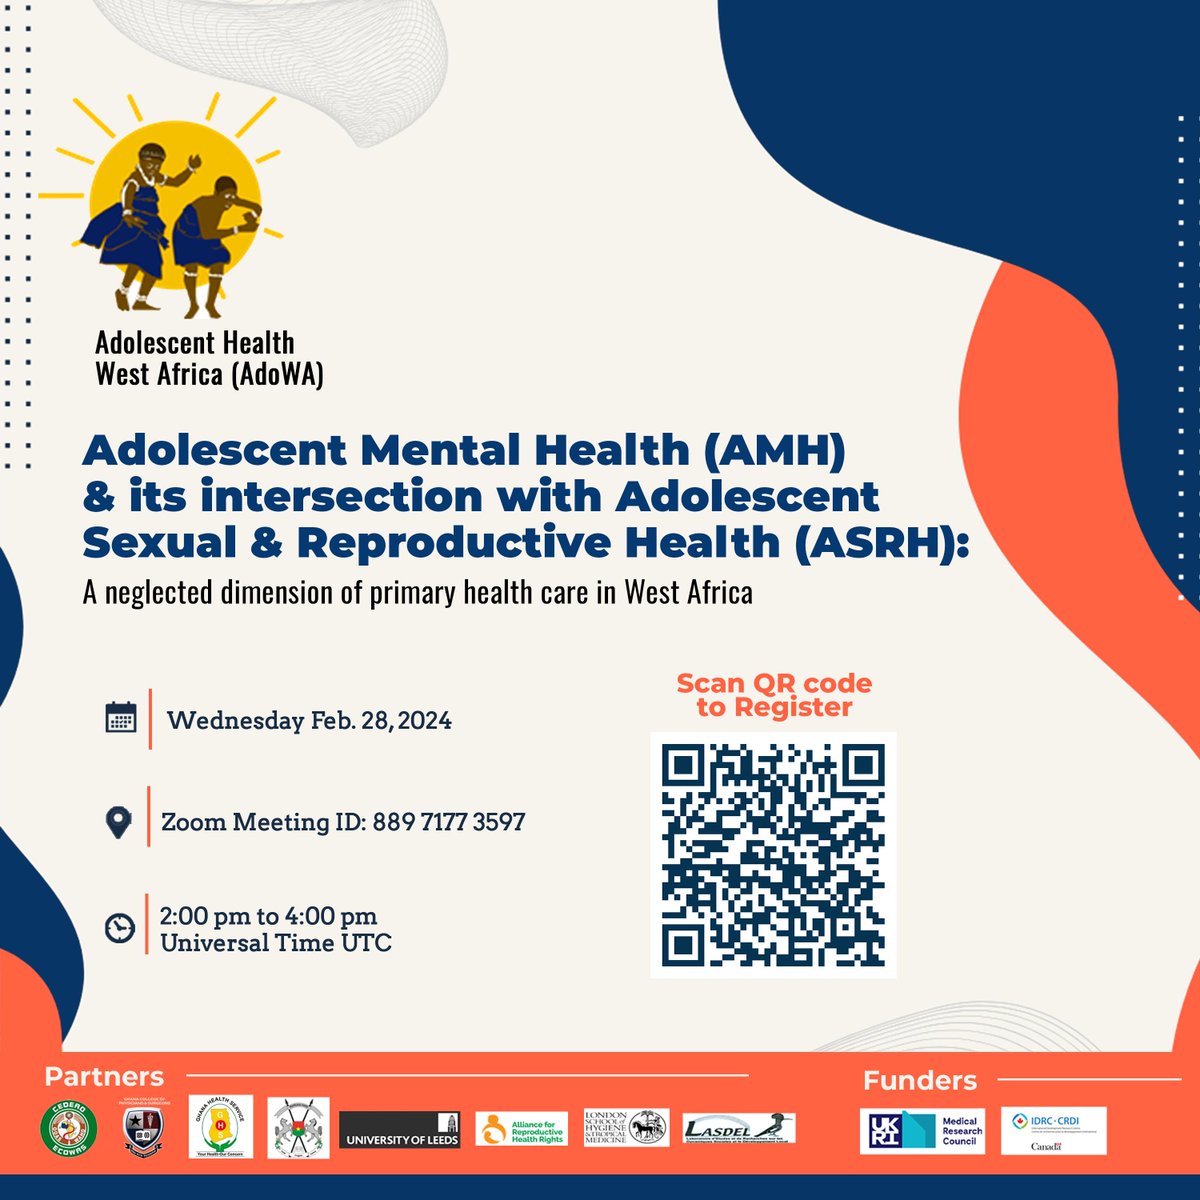 Join us and our partners on the 28th of this month, for an @AdolescentsWA event, as we touch on Adolescent Mental Health and its intersection with Adolescent Sexual and Reproductive Health in West Africa. Visit here to register for the event wahooas.zoom.us/meeting/regist…